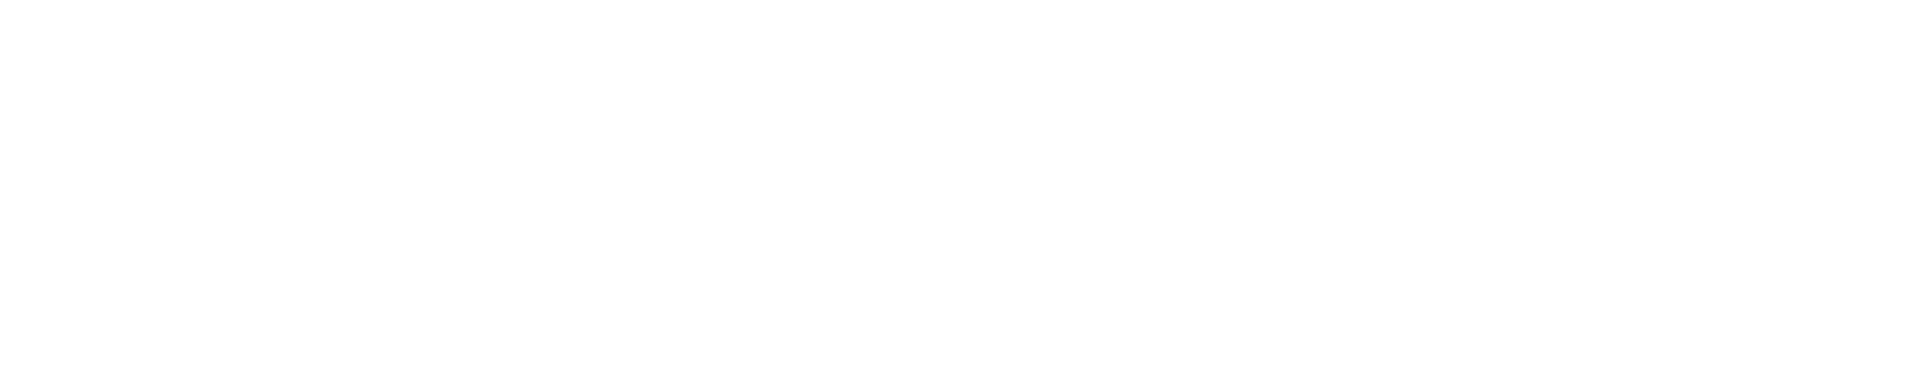 Mersmann Consulting Group Logo